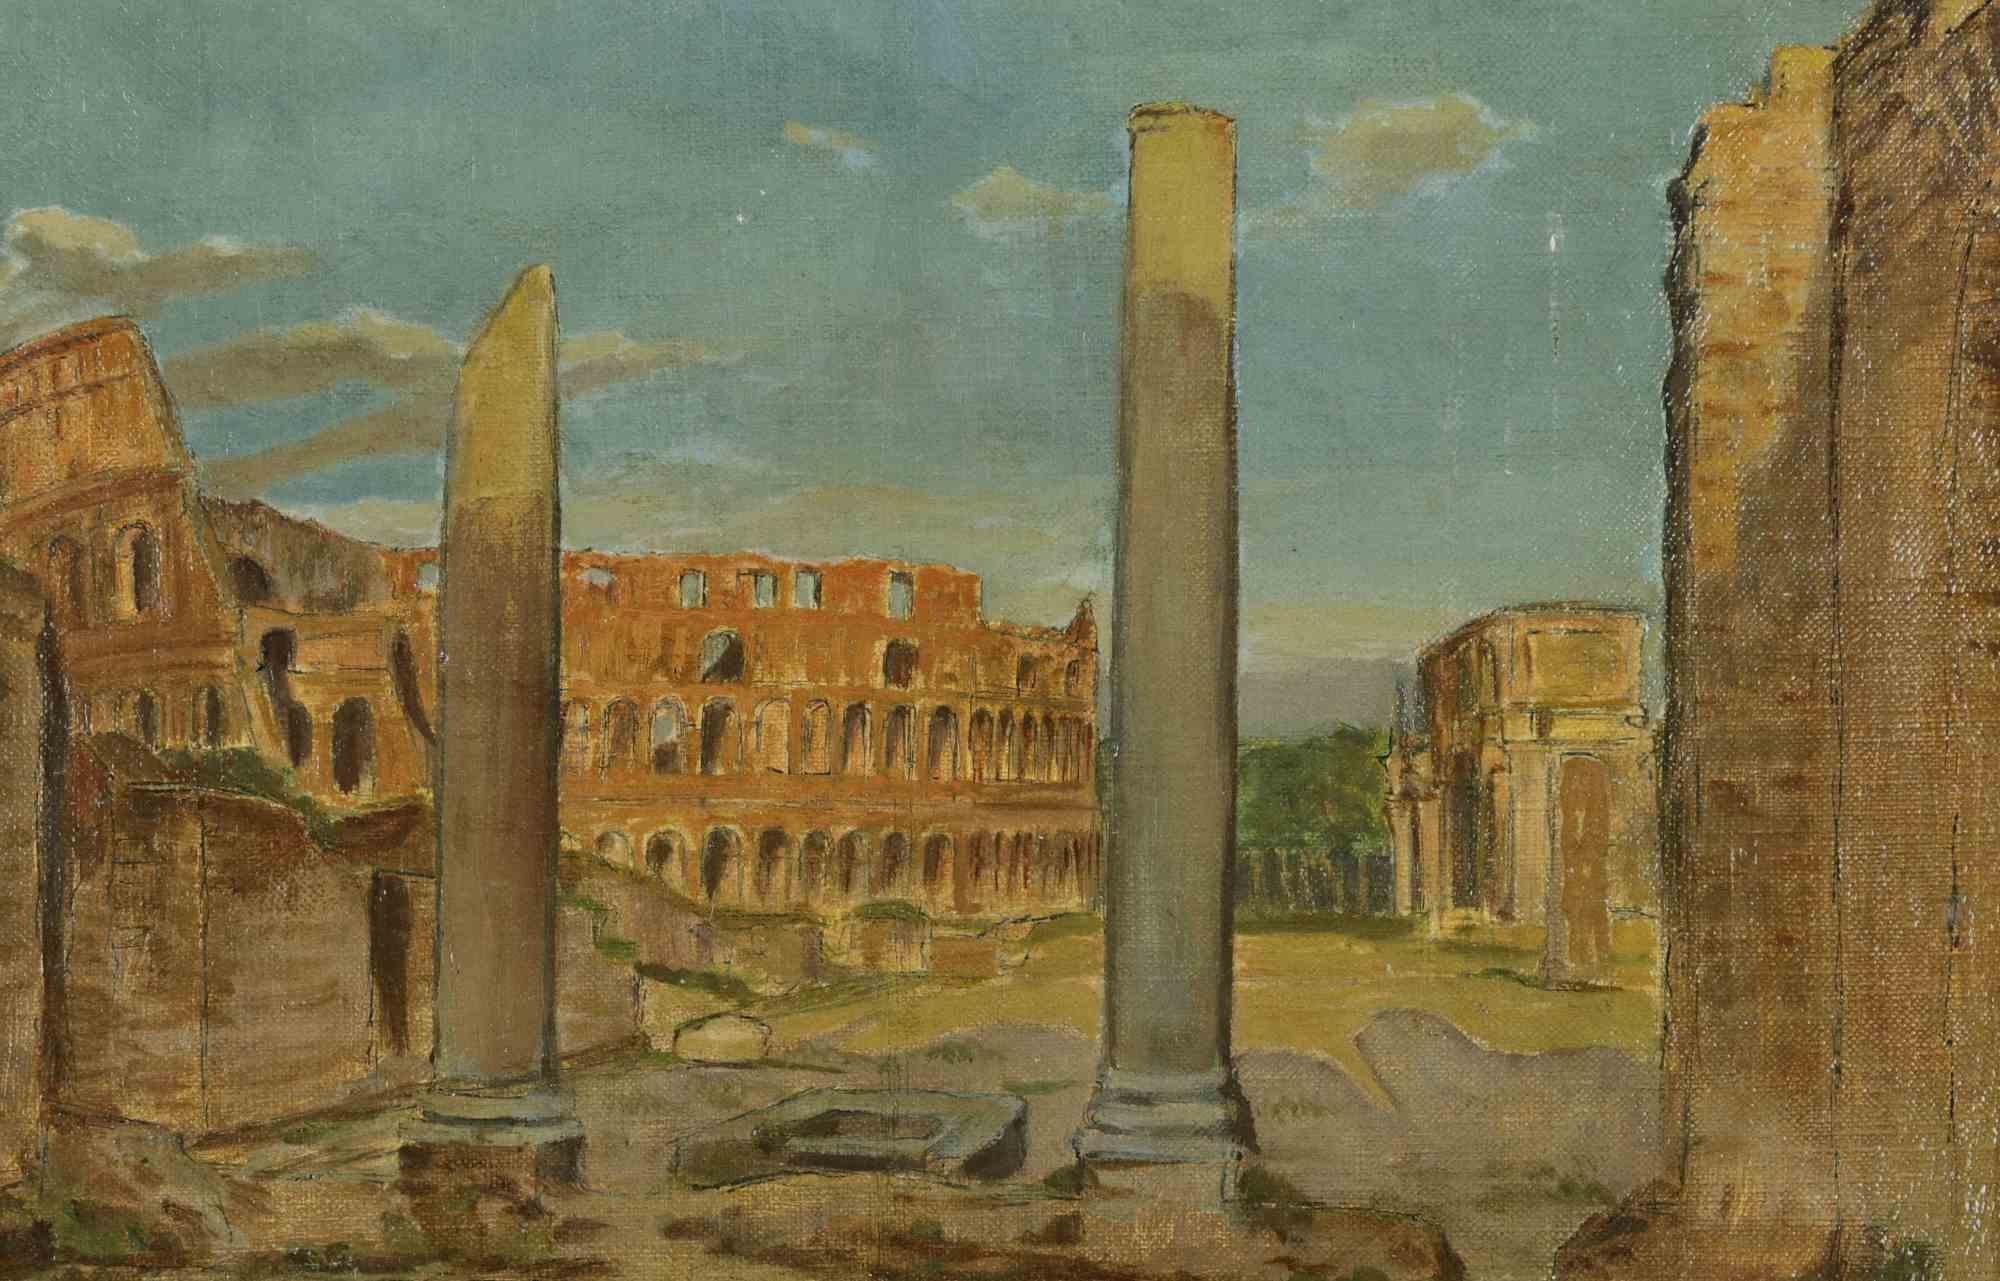 Imperial Forums and Coliseum on the Background - Oil Paint - 1899 - Modern Painting by Unknown